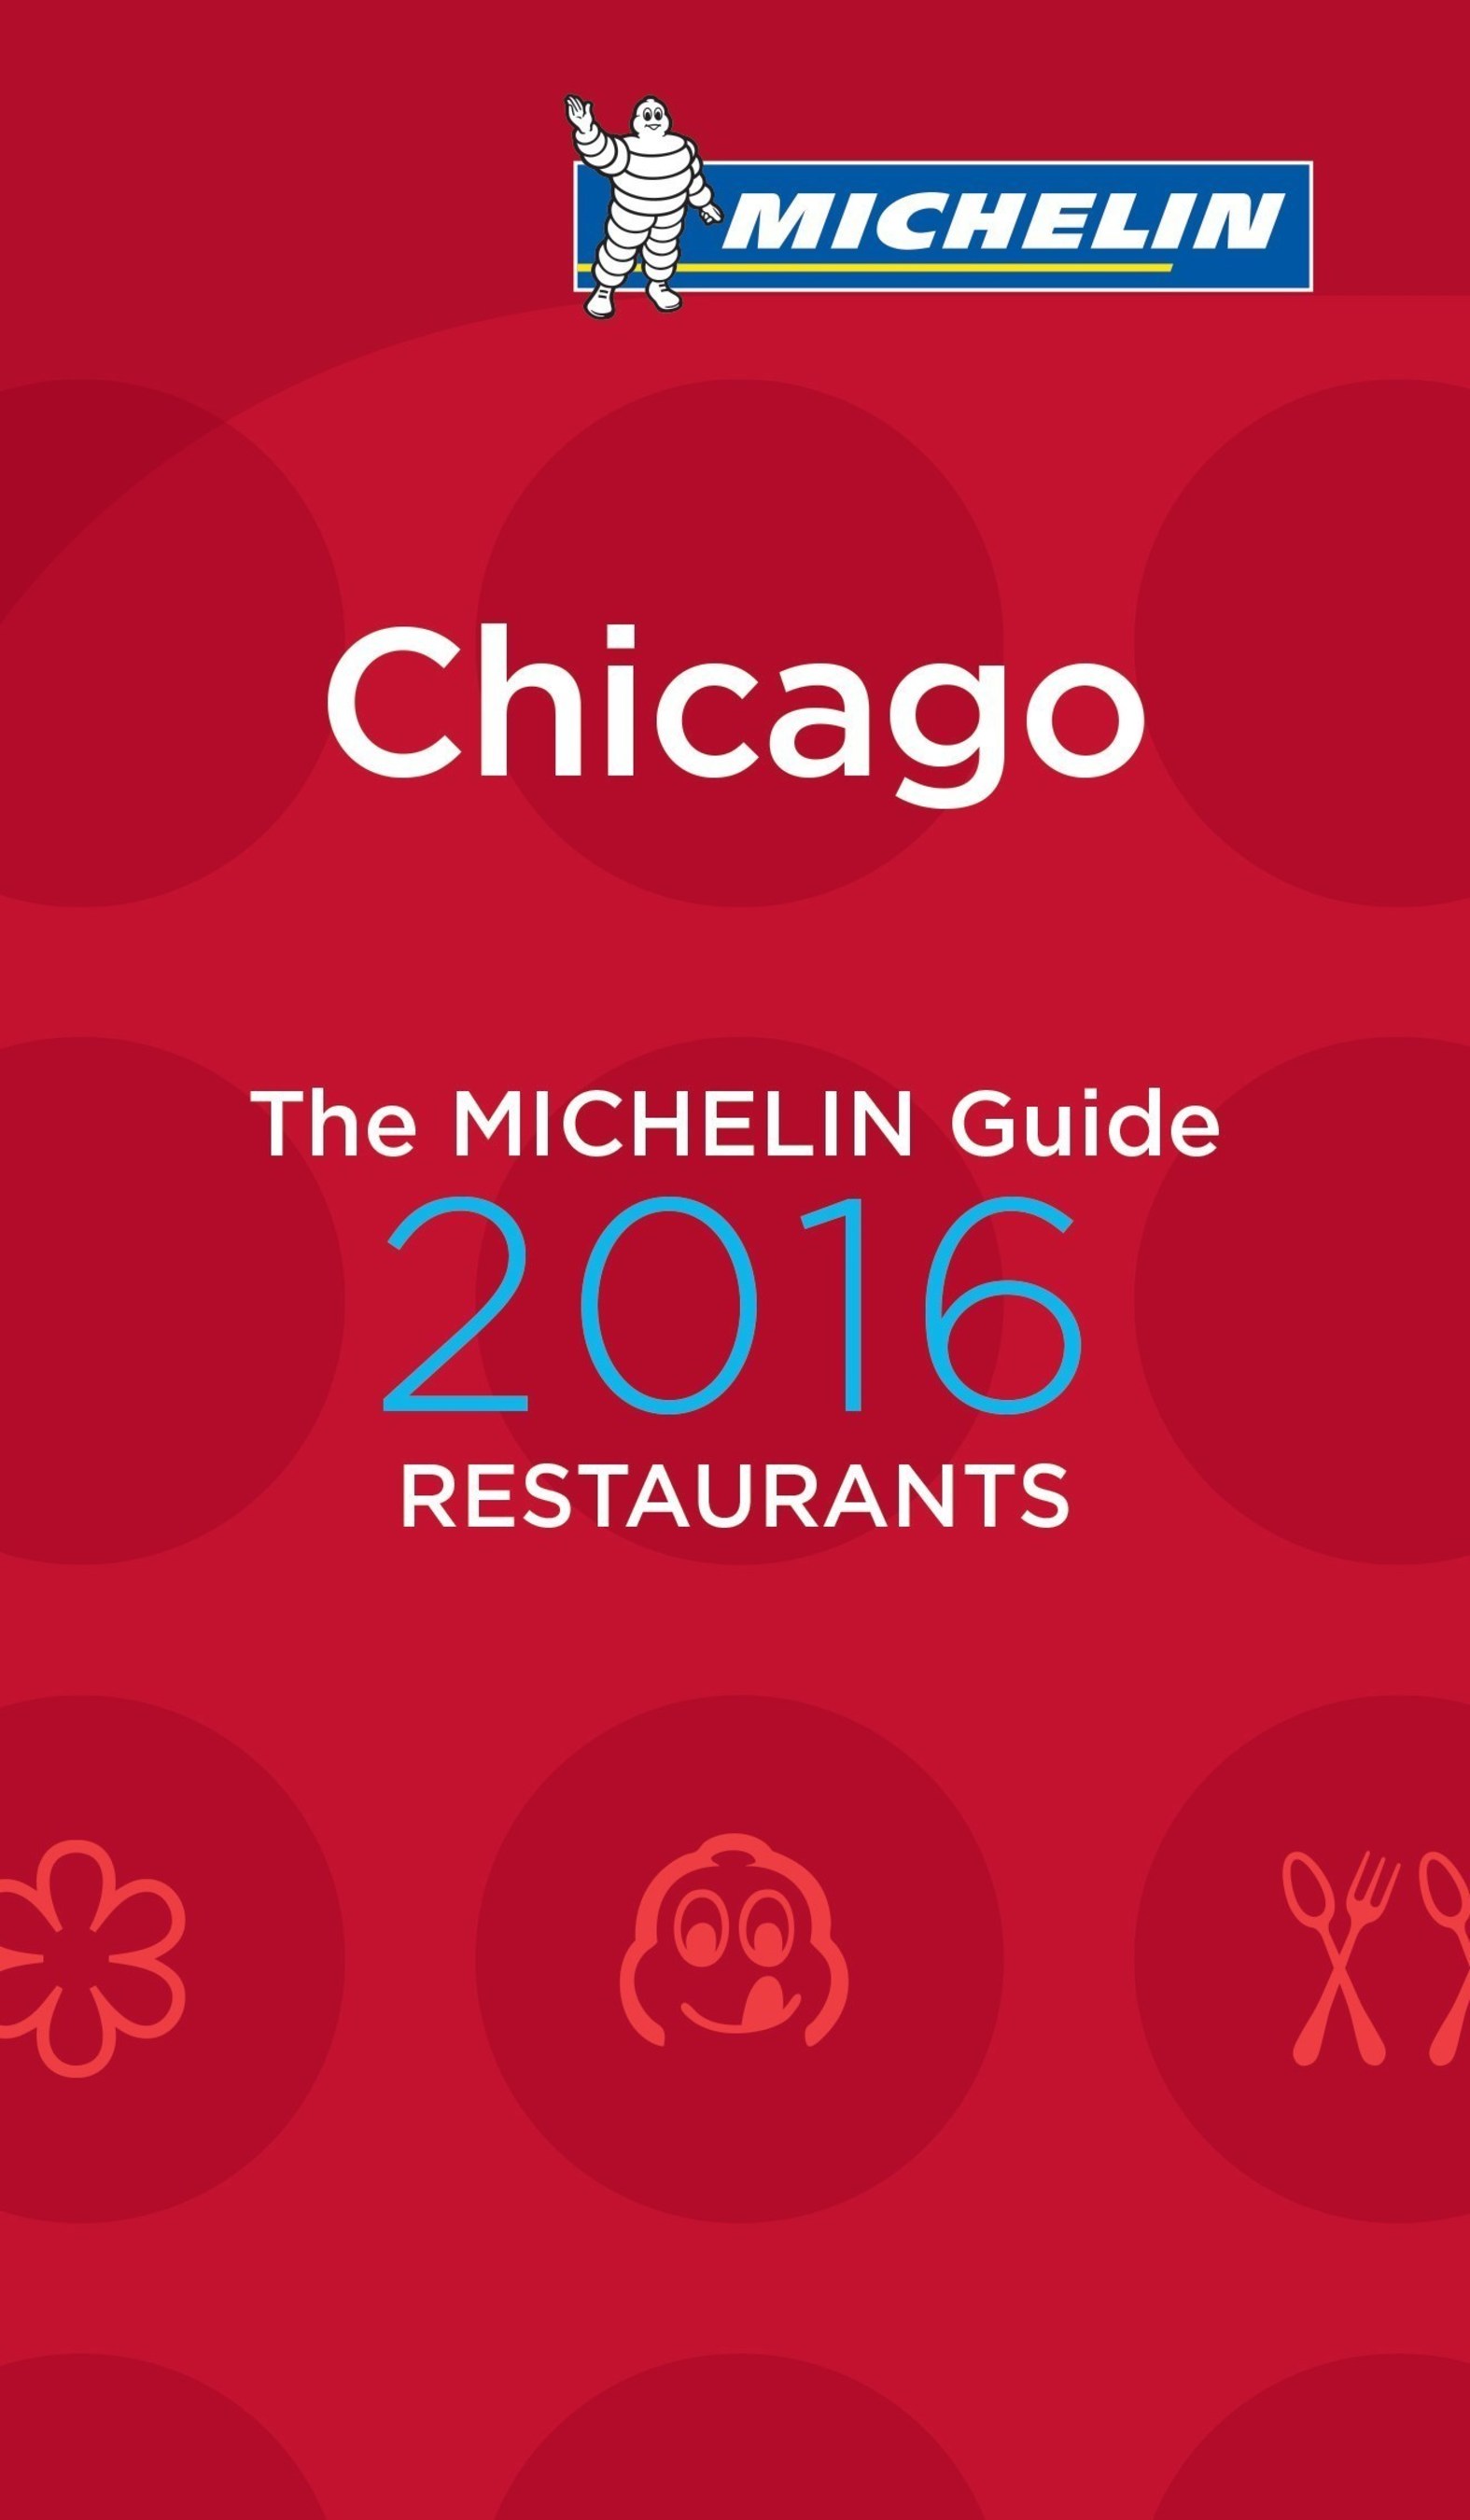 Michelin announces starred restaurants in Chicago for 2016